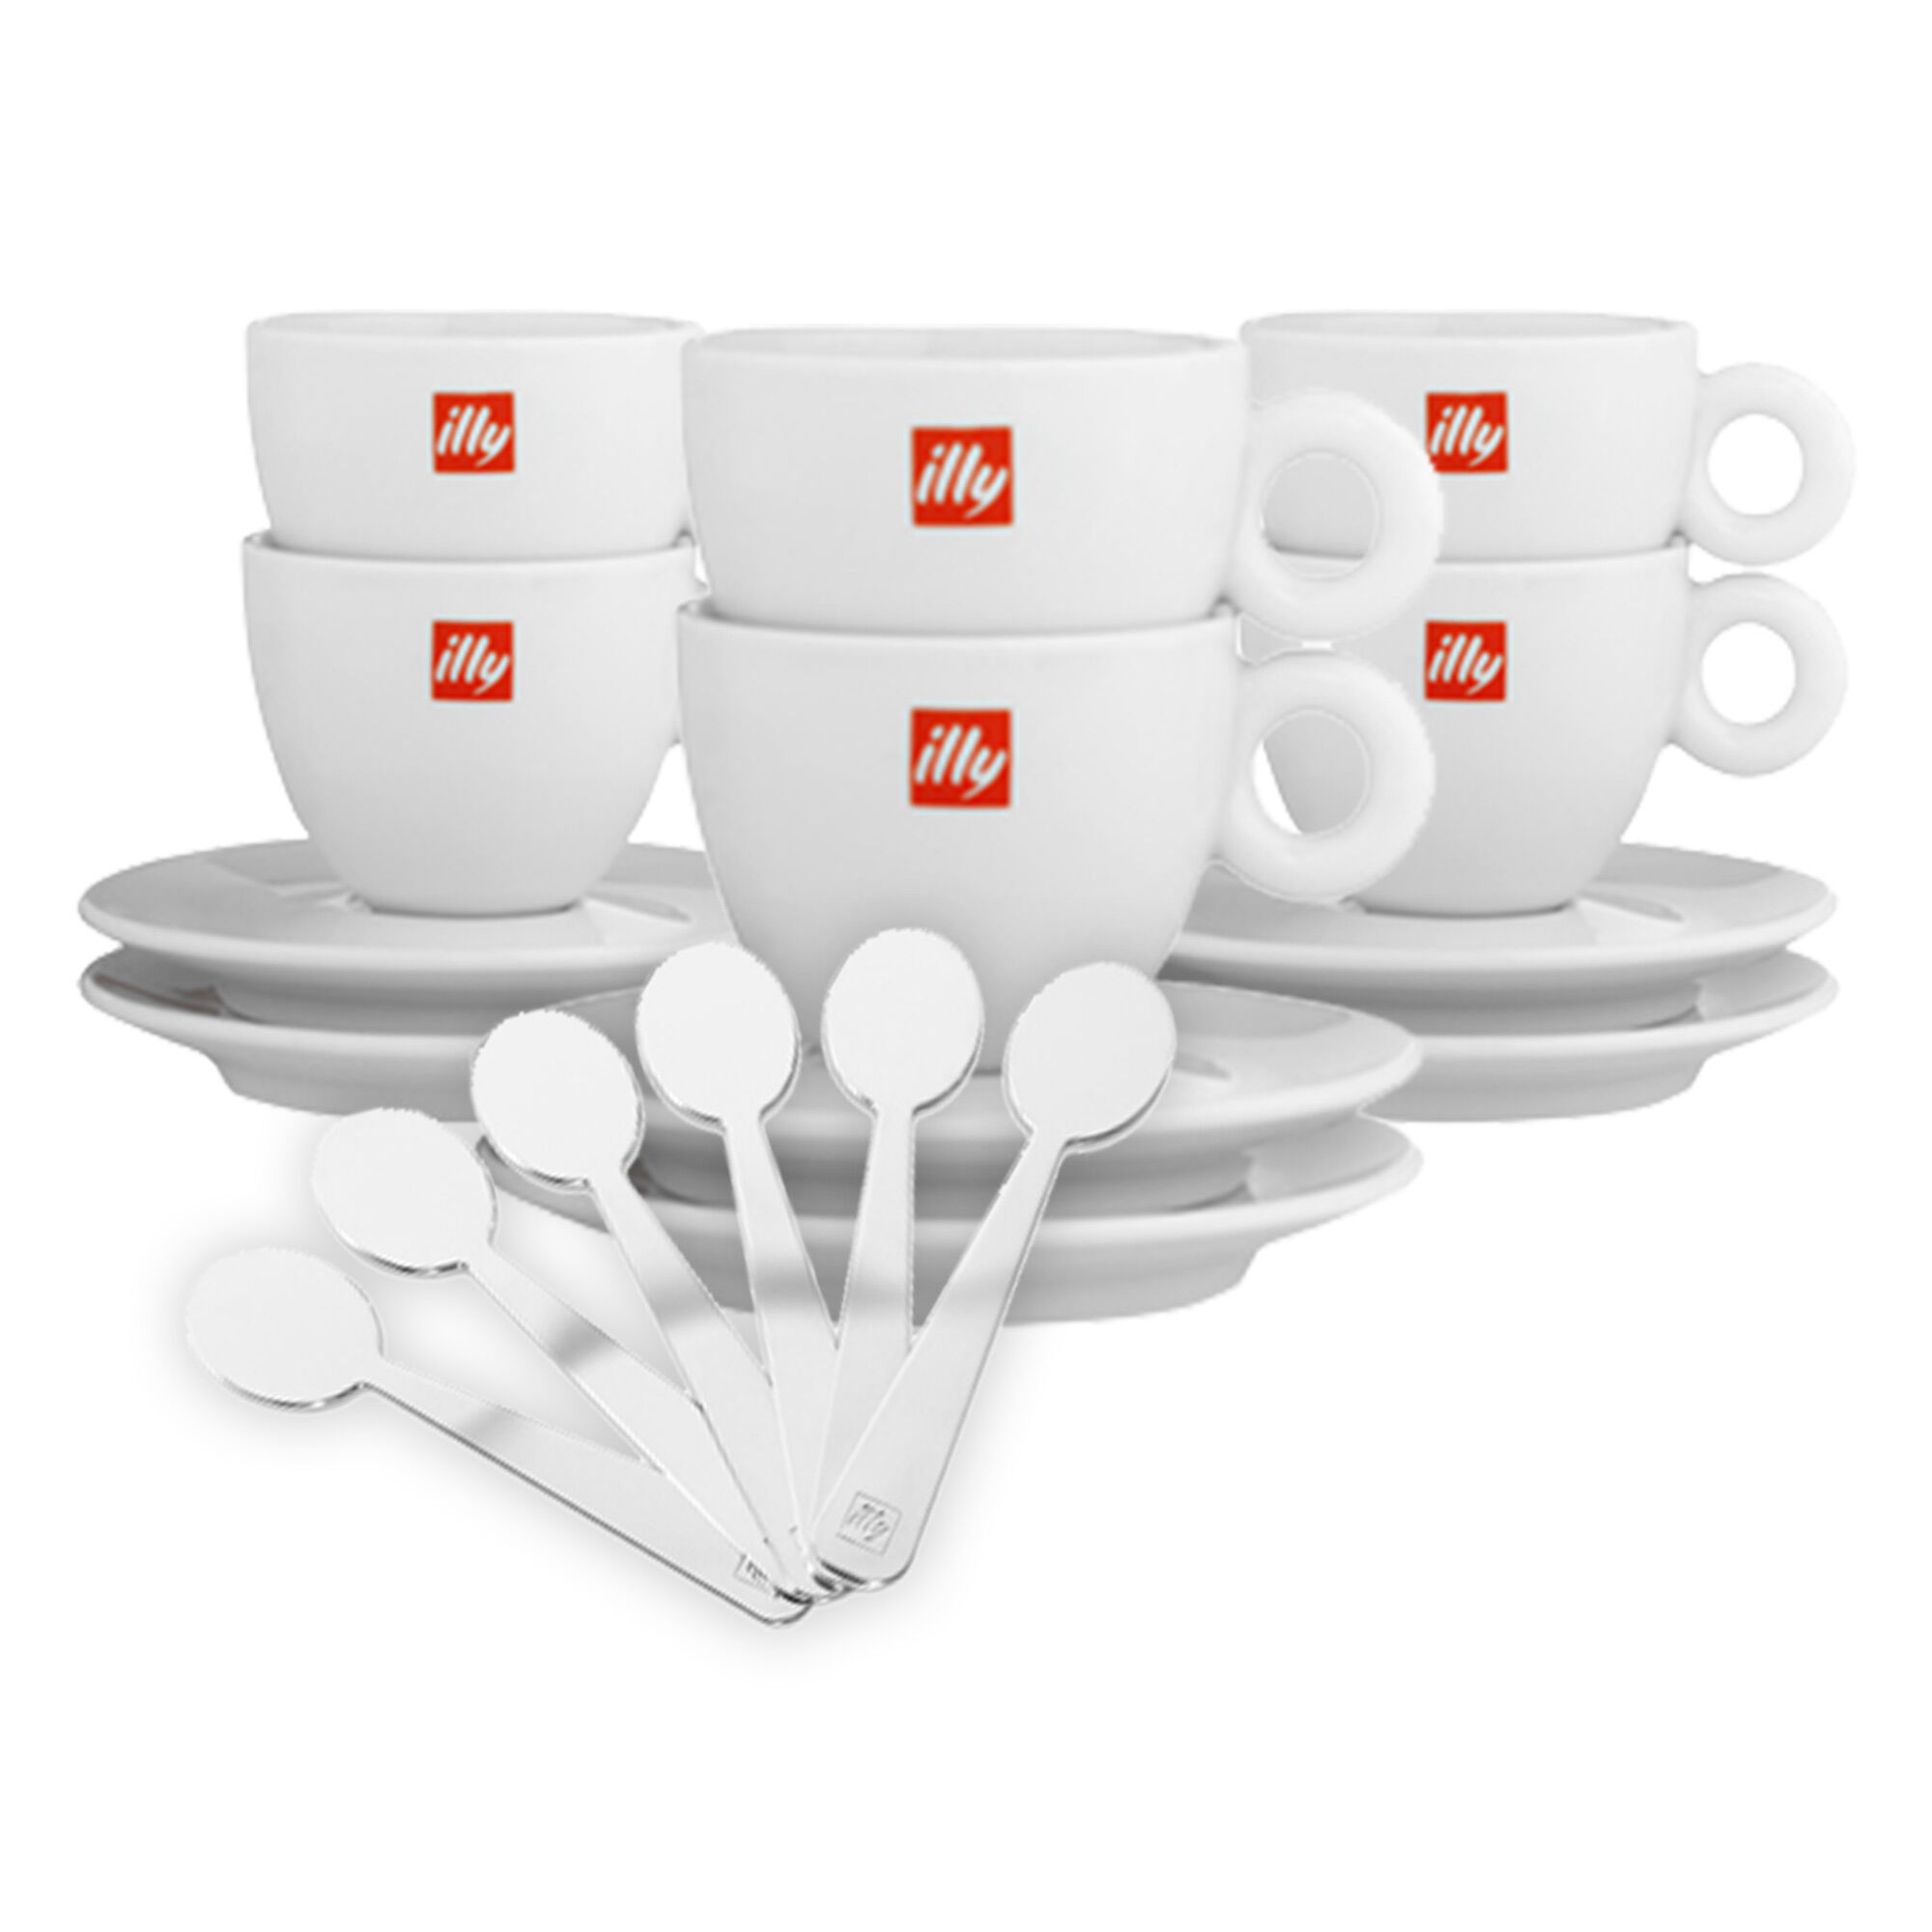 illy Entertaining Gift Set (Set of 6 Cups & Stirrers)